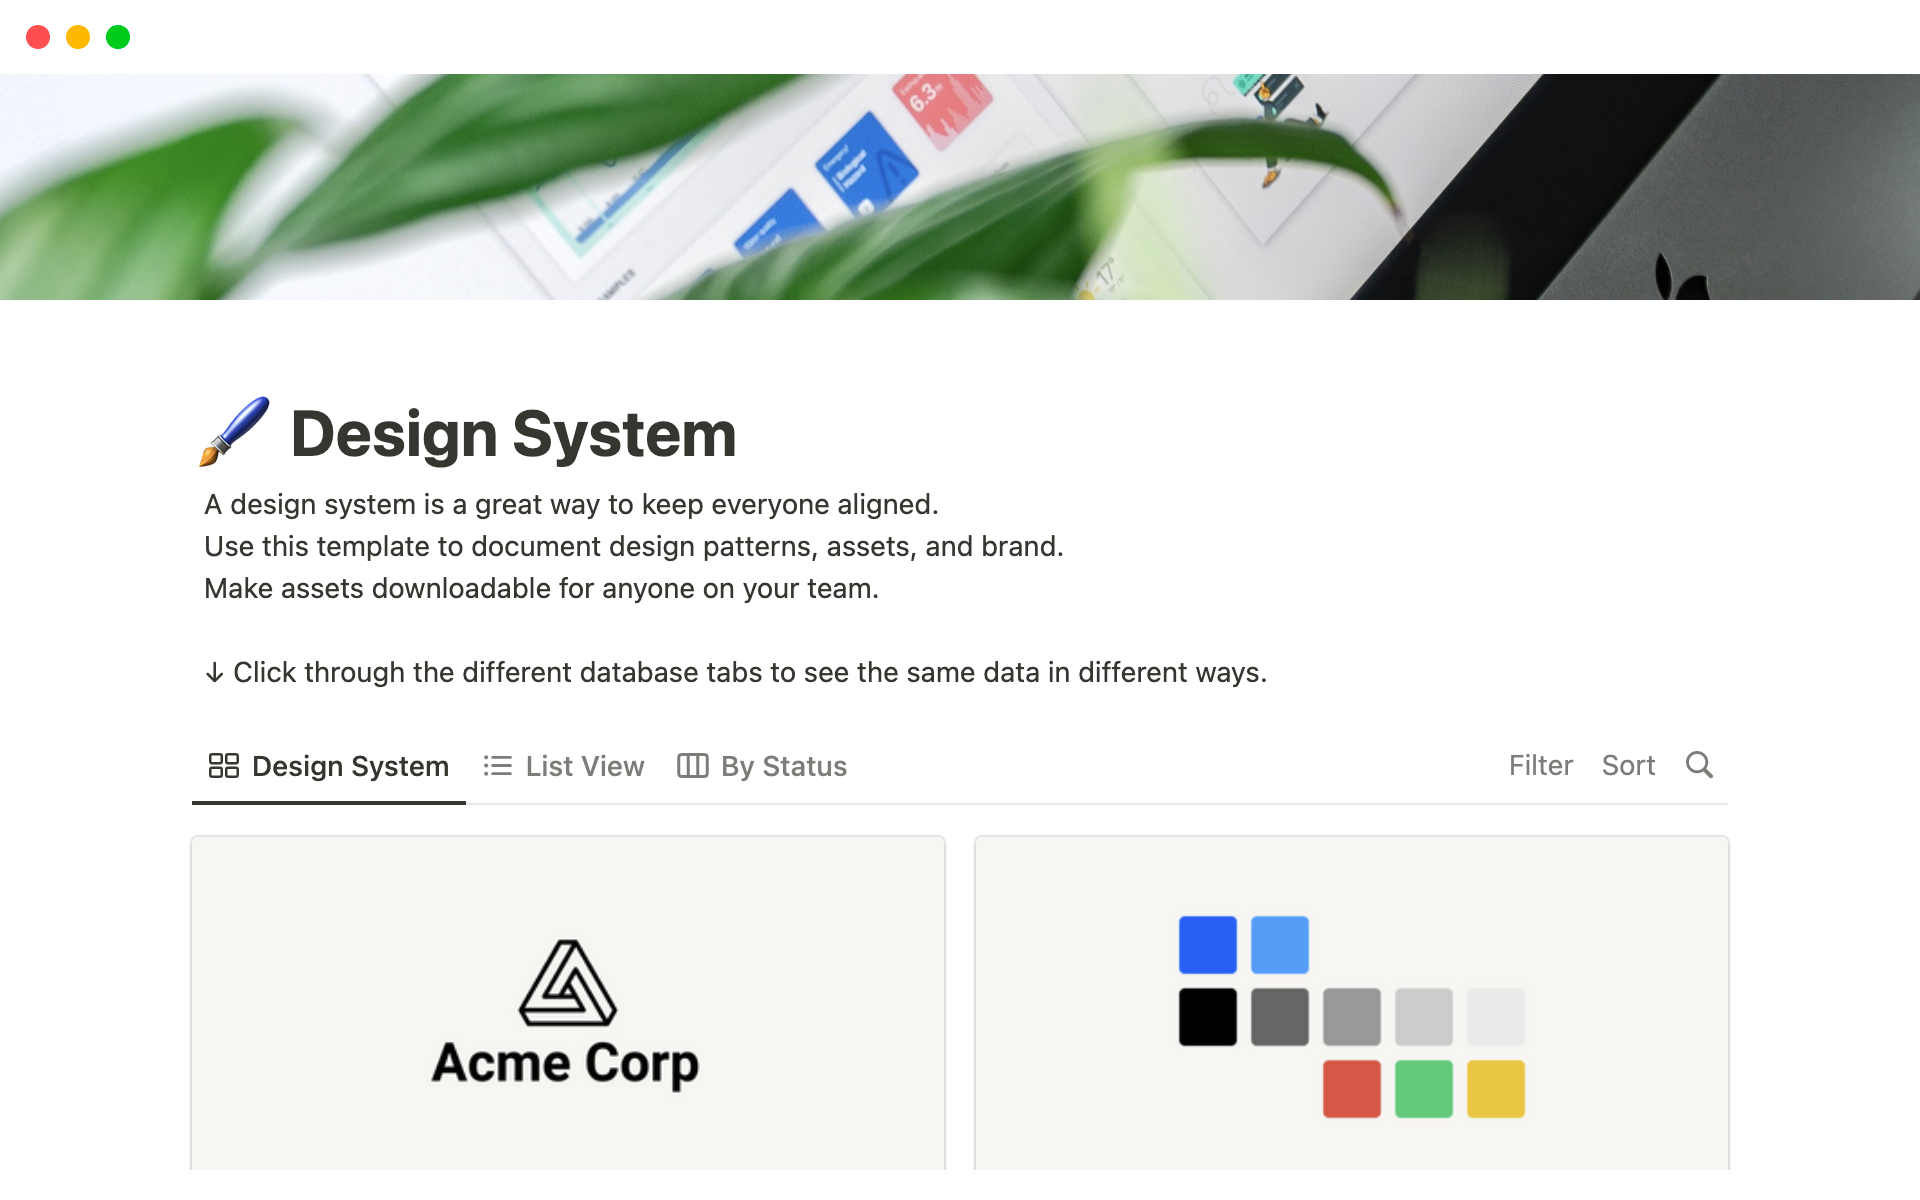 Document design patterns, assets, and brand. Make assets downloadable for anyone on your team.